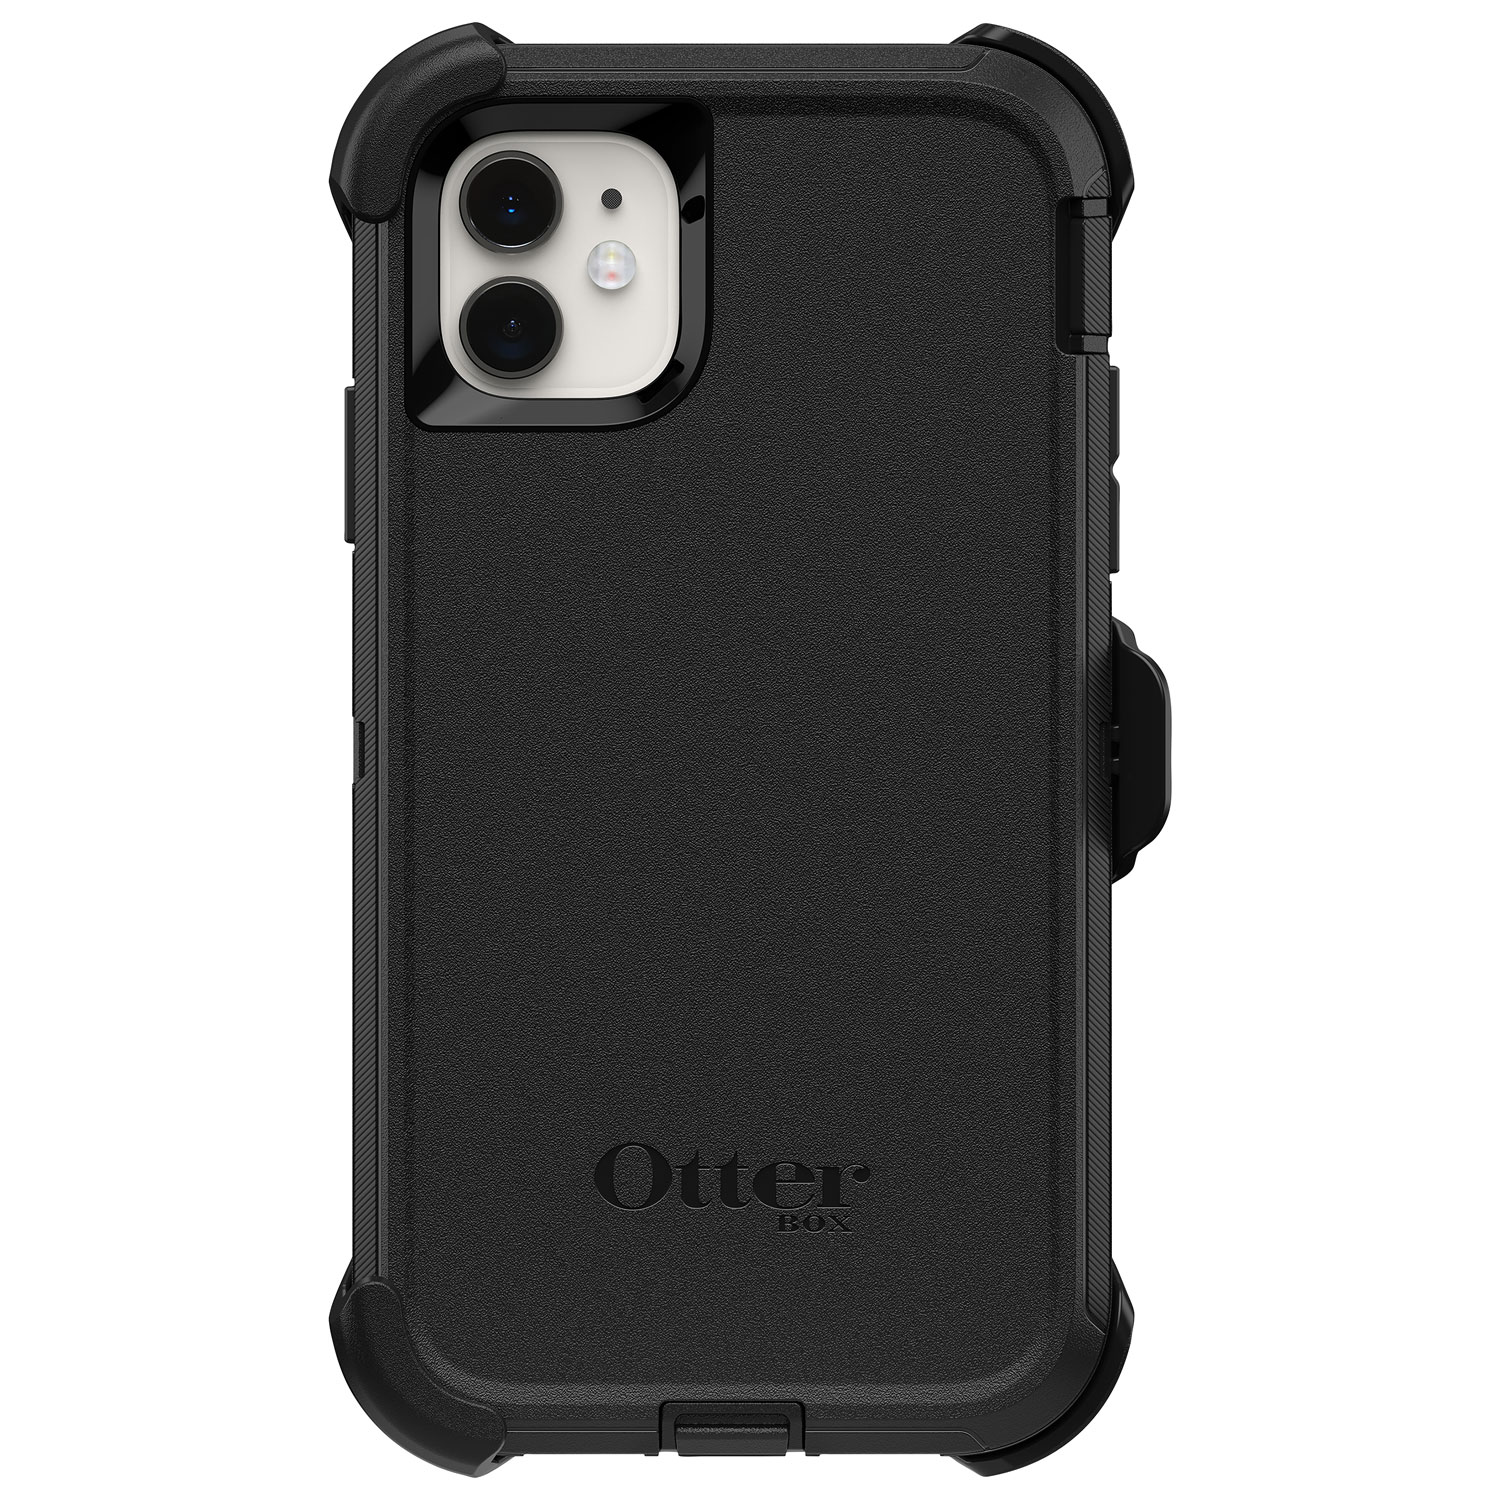 OtterBox Defender Screenless Edition Fitted Hard Shell Case for iPhone 11 - Black